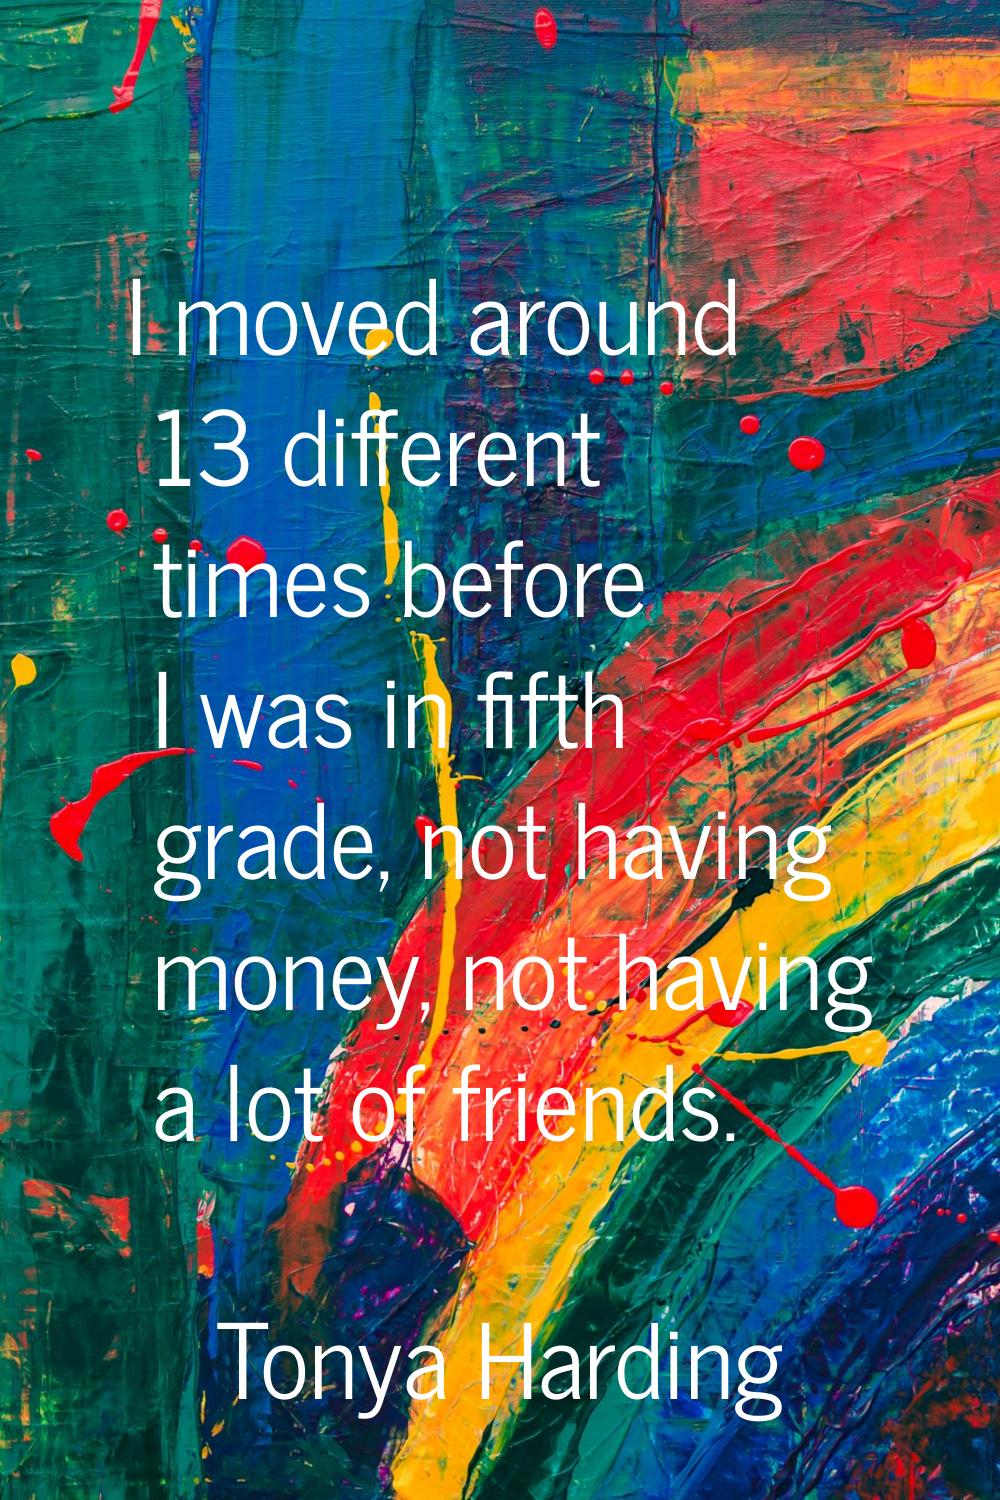 I moved around 13 different times before I was in fifth grade, not having money, not having a lot o